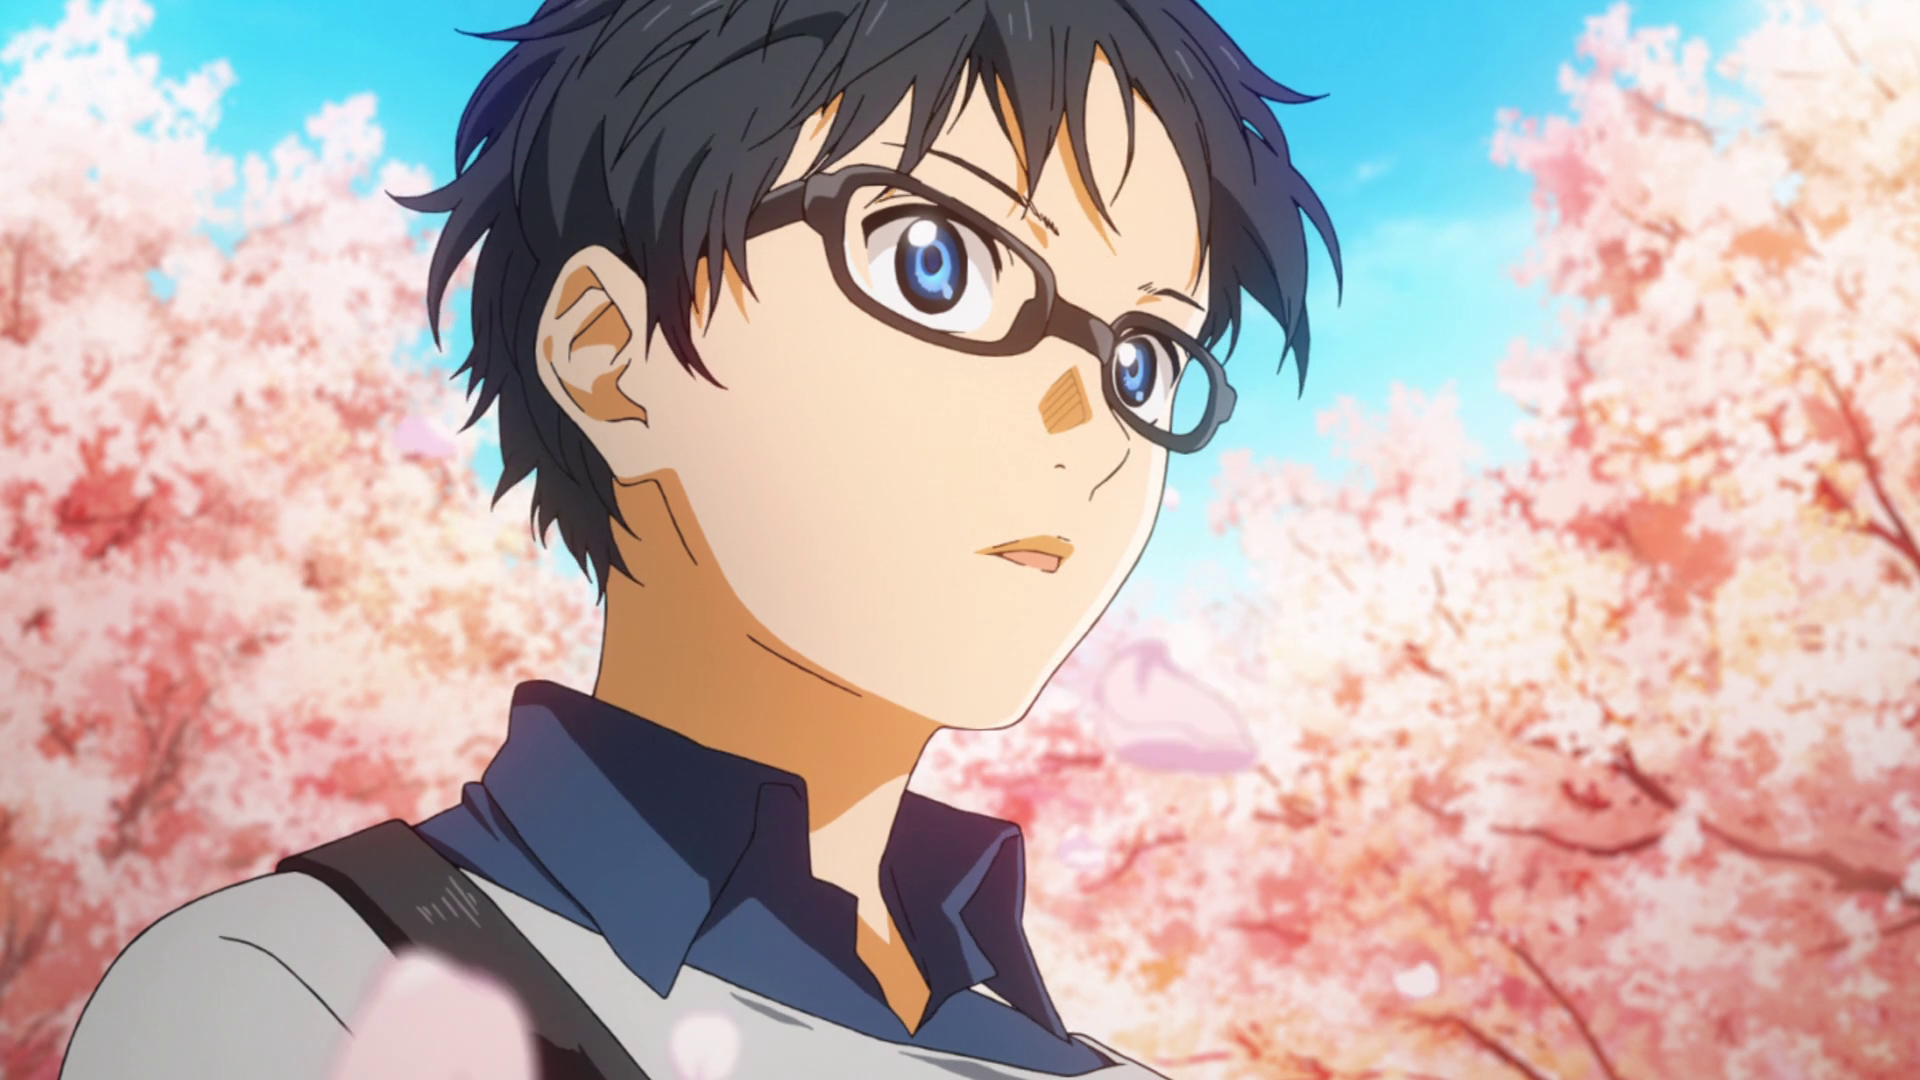 MyAnimeList.net - Shigatsu wa Kimi no Uso started airing five years ago.  Over 50,000 MAL users have added the anime to their favorites - are you one  of them?